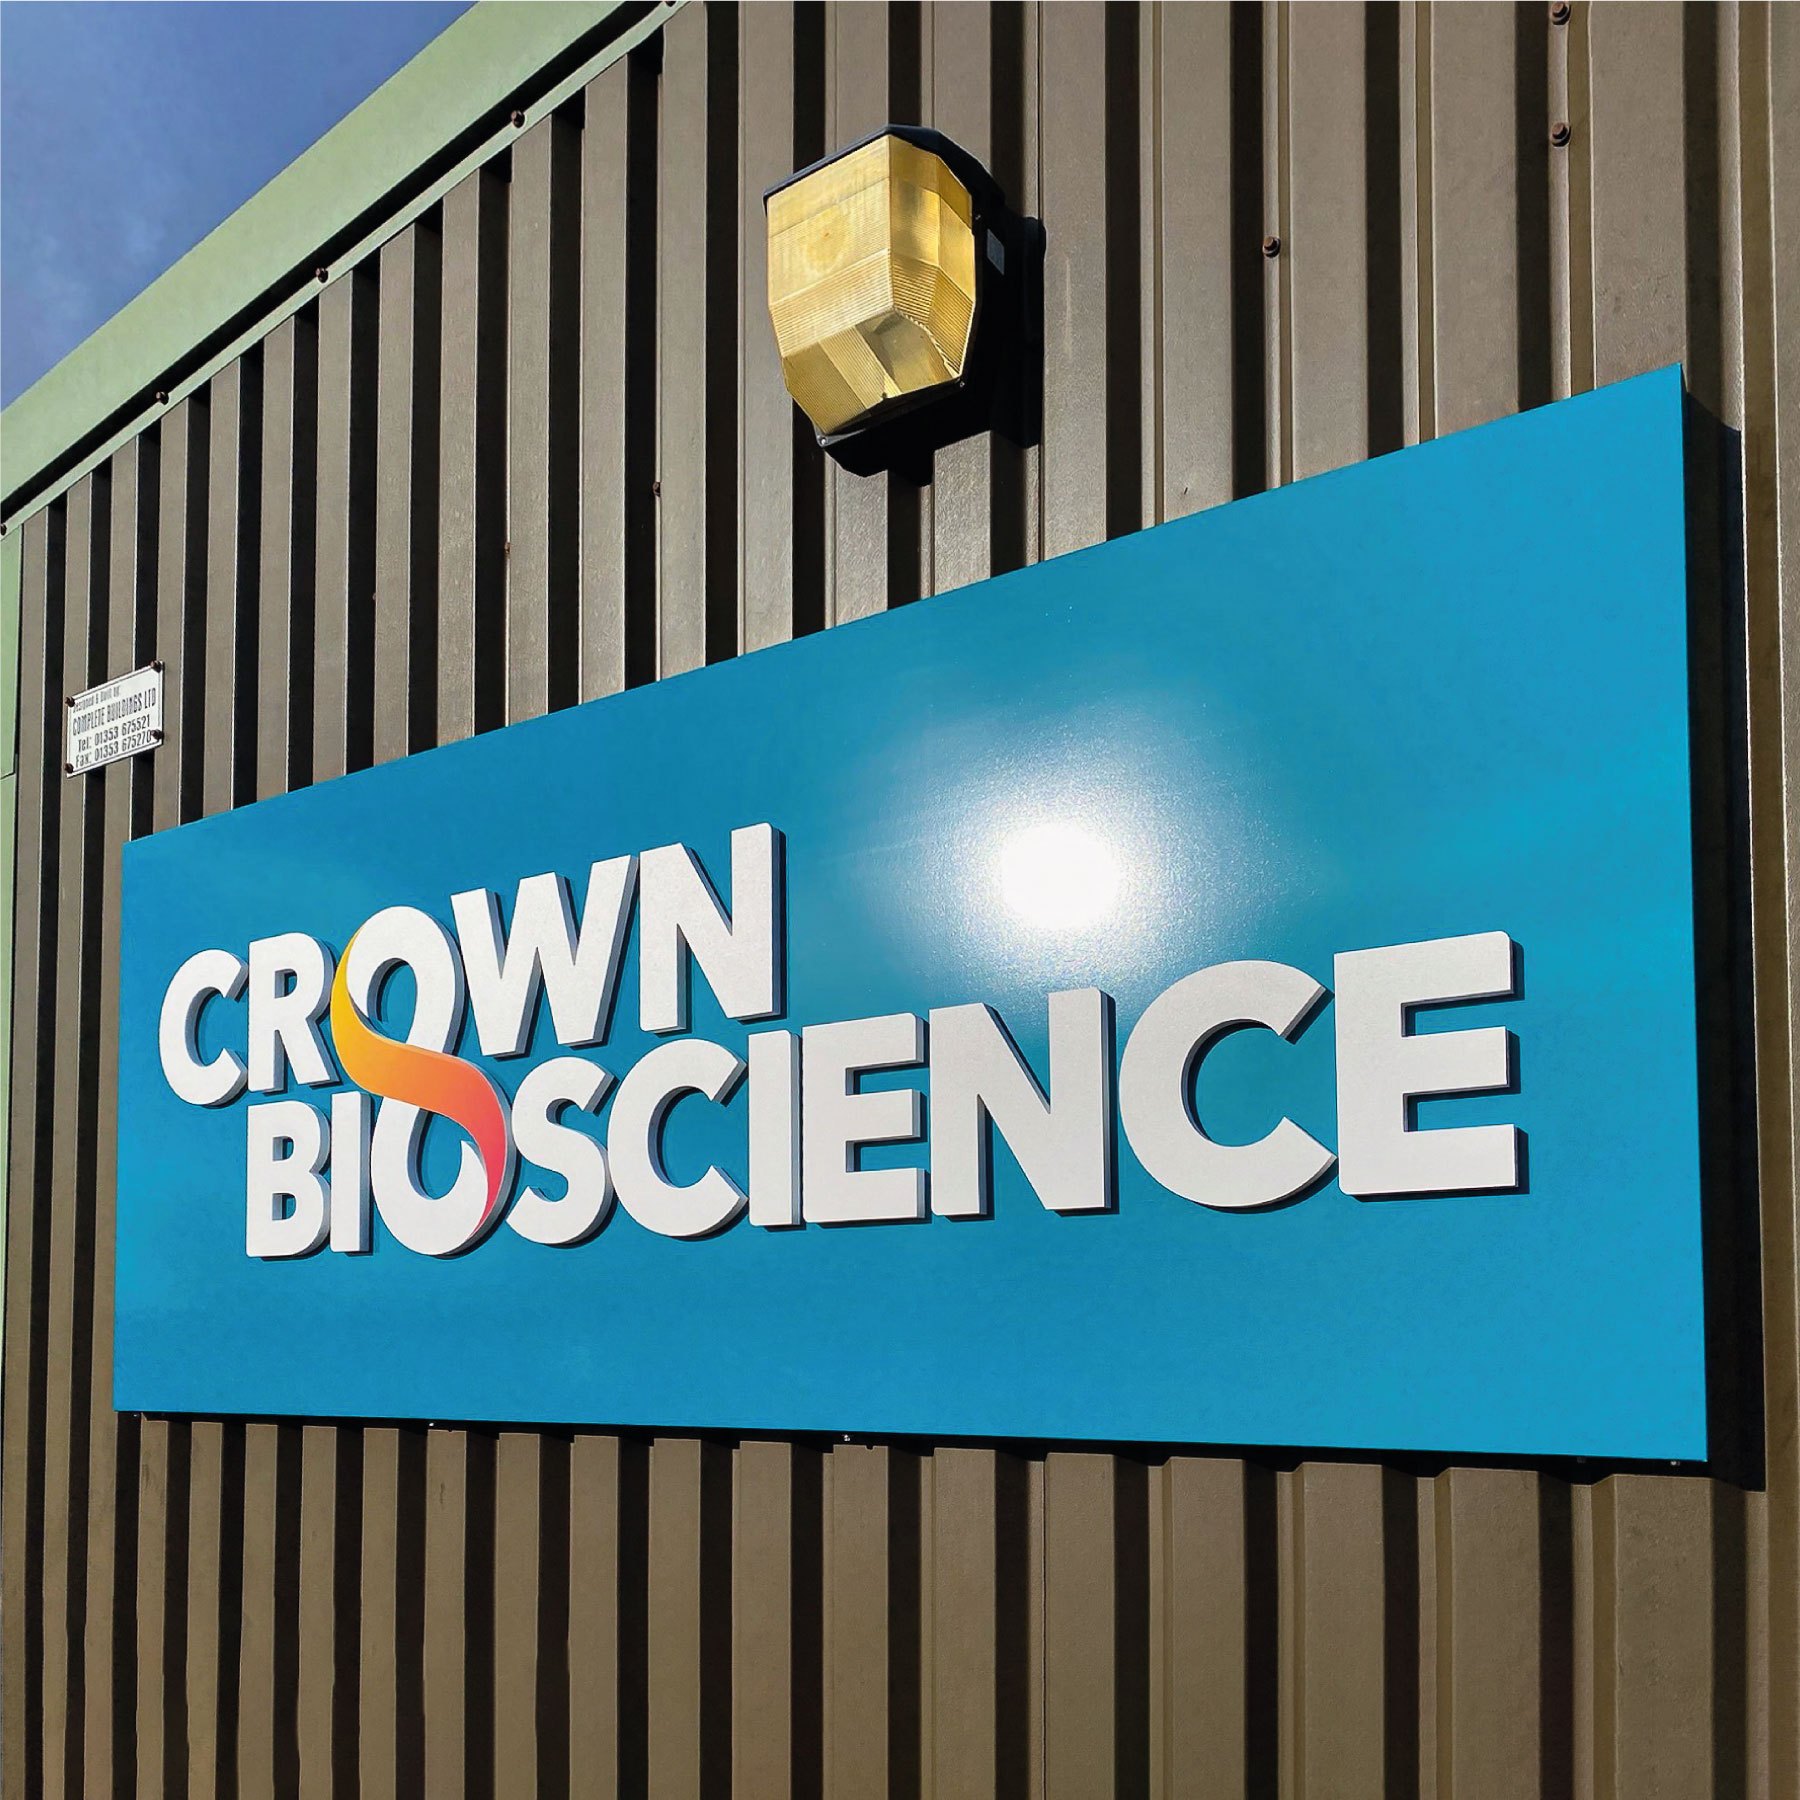 A light blue sign panel on a corrugated metal wall. The sign has white lettering saying 'Crown Bioscience' that is slightly 3D, the letter O in crown and bioscience create an infinity symbol together with a red to yellow gradient.